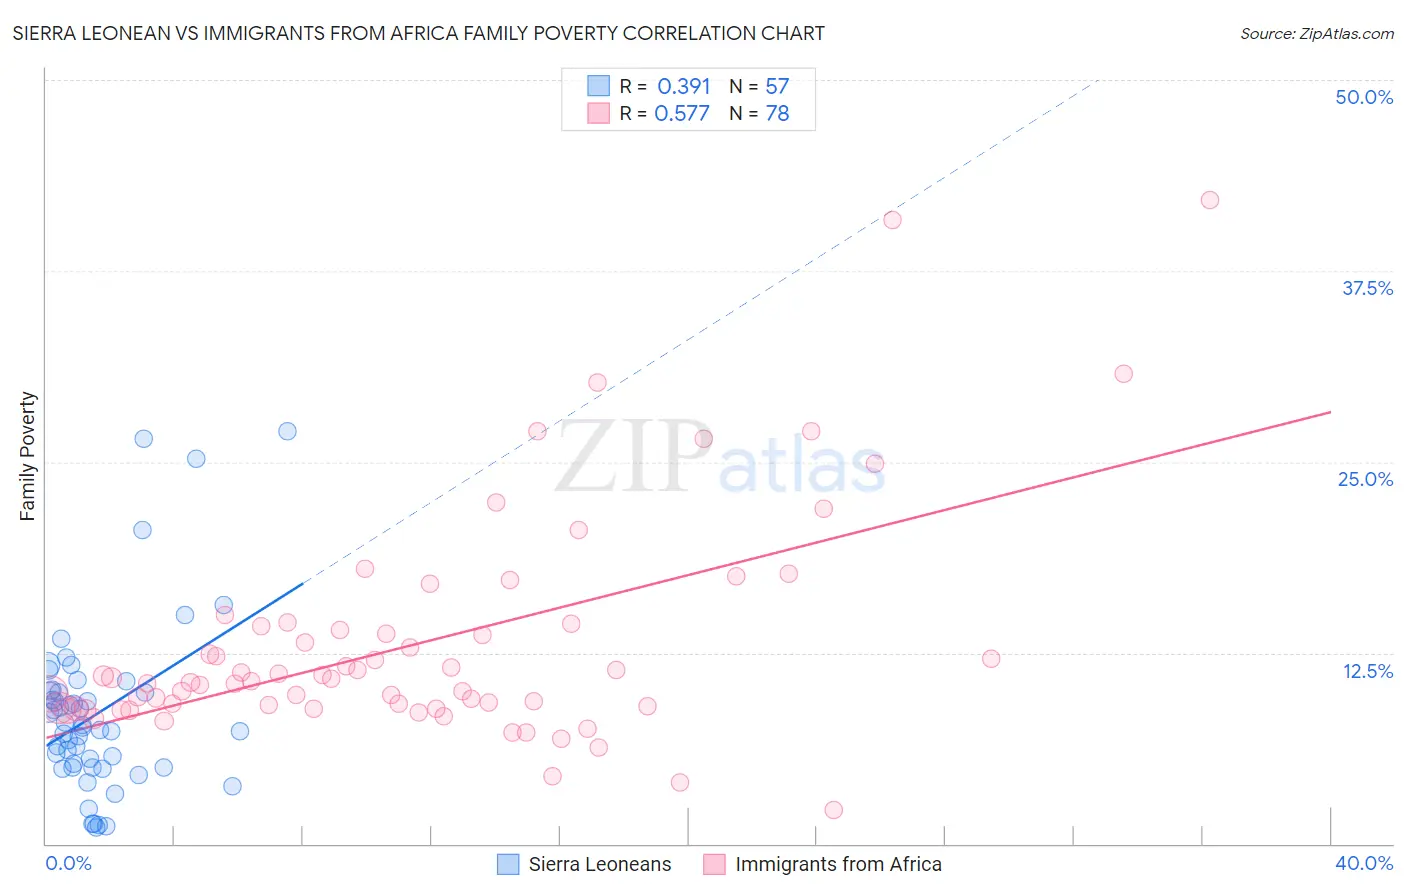 Sierra Leonean vs Immigrants from Africa Family Poverty